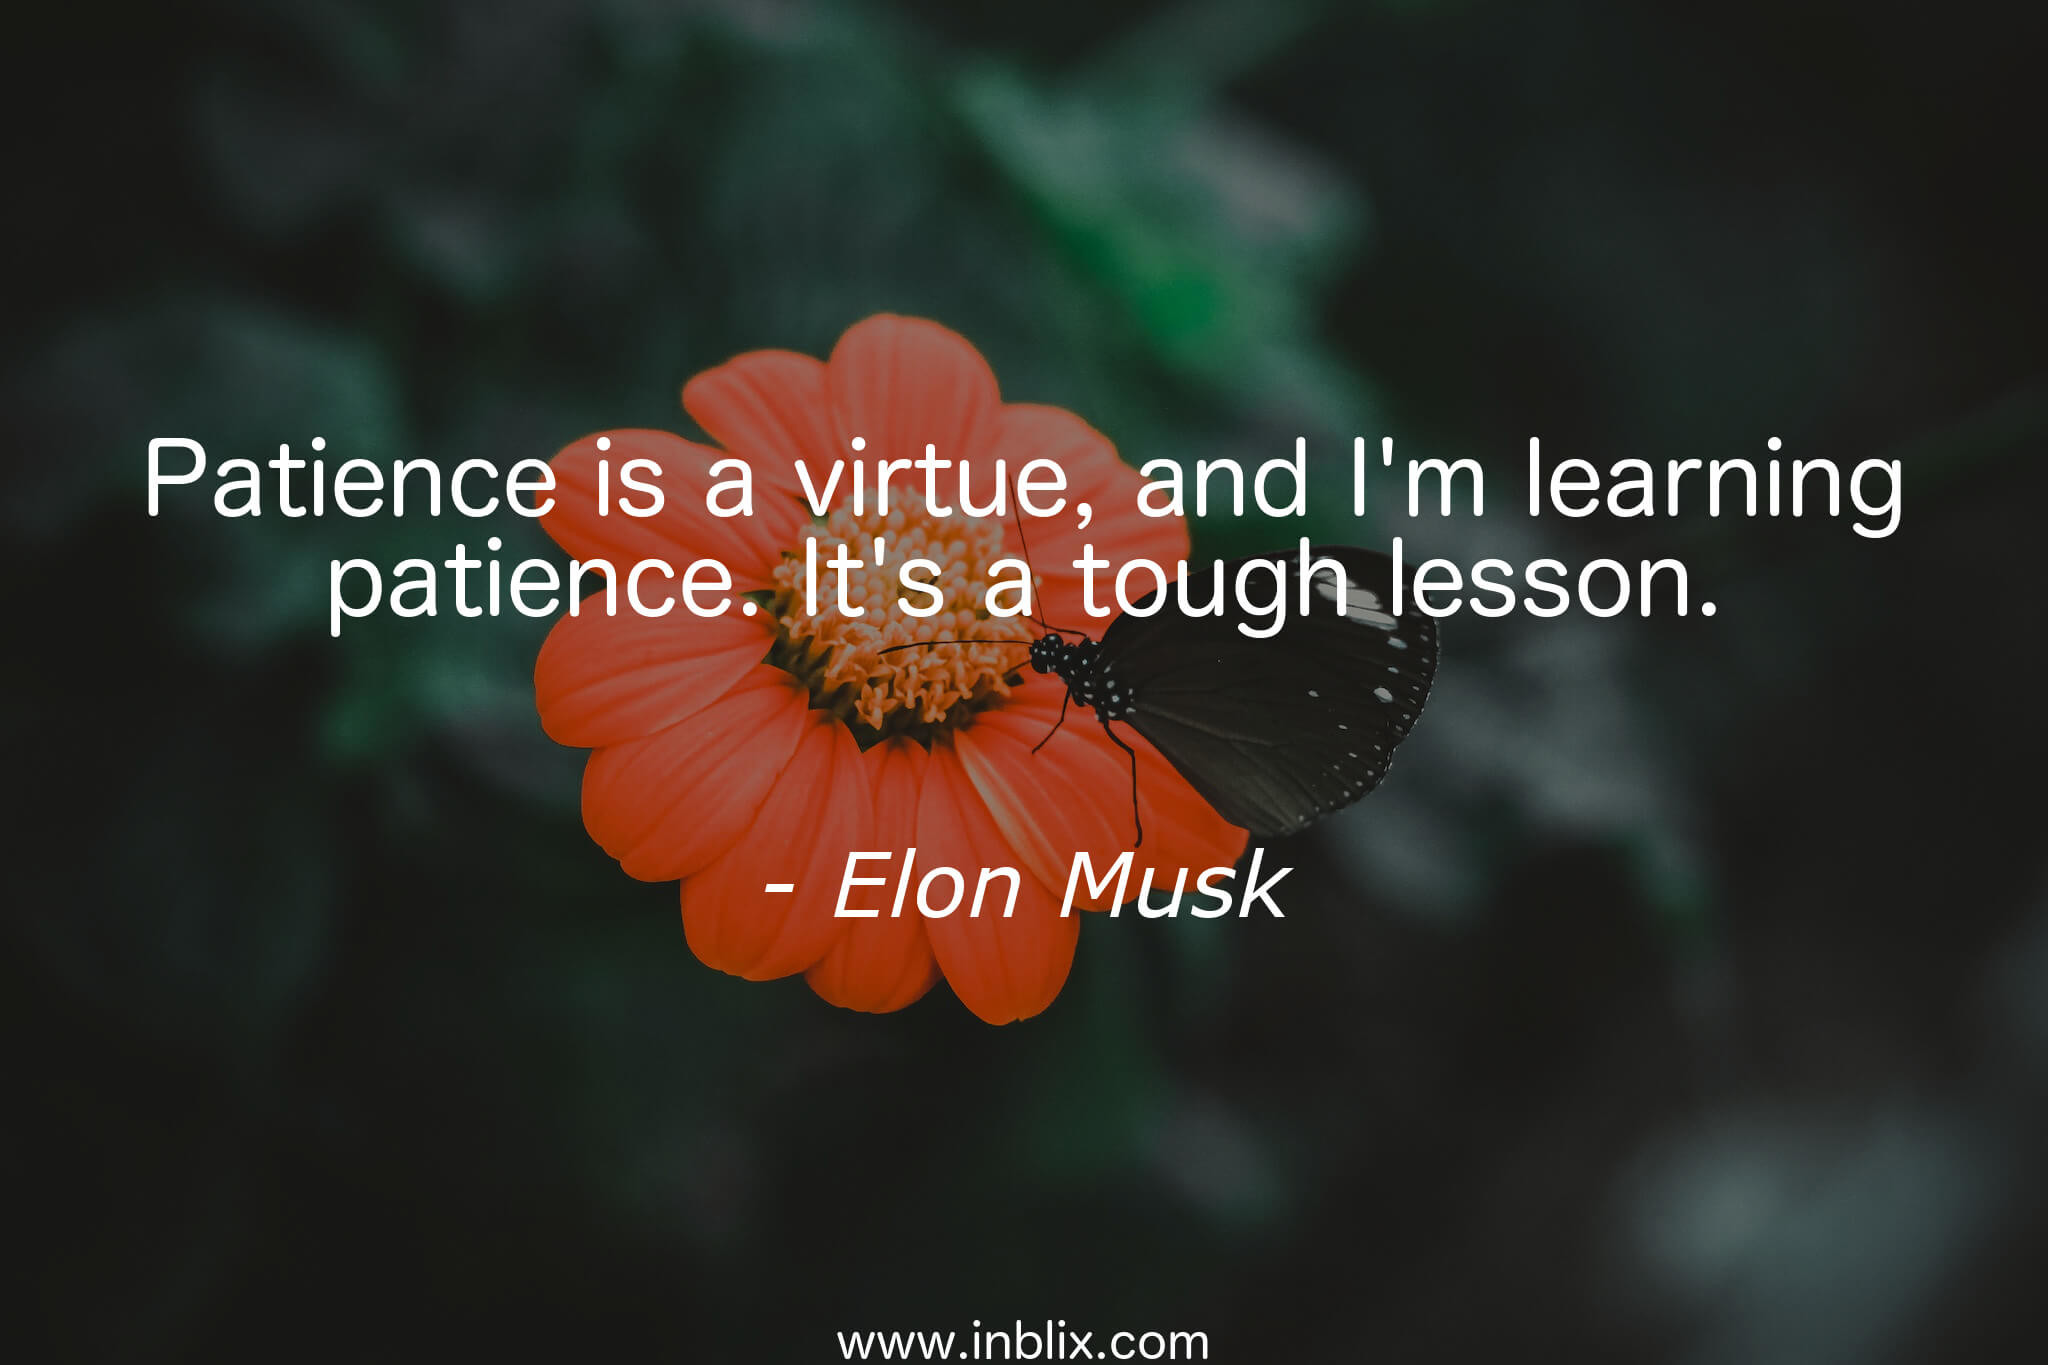 Patience is a virtue, and Im learning patience. Its a tough lesson